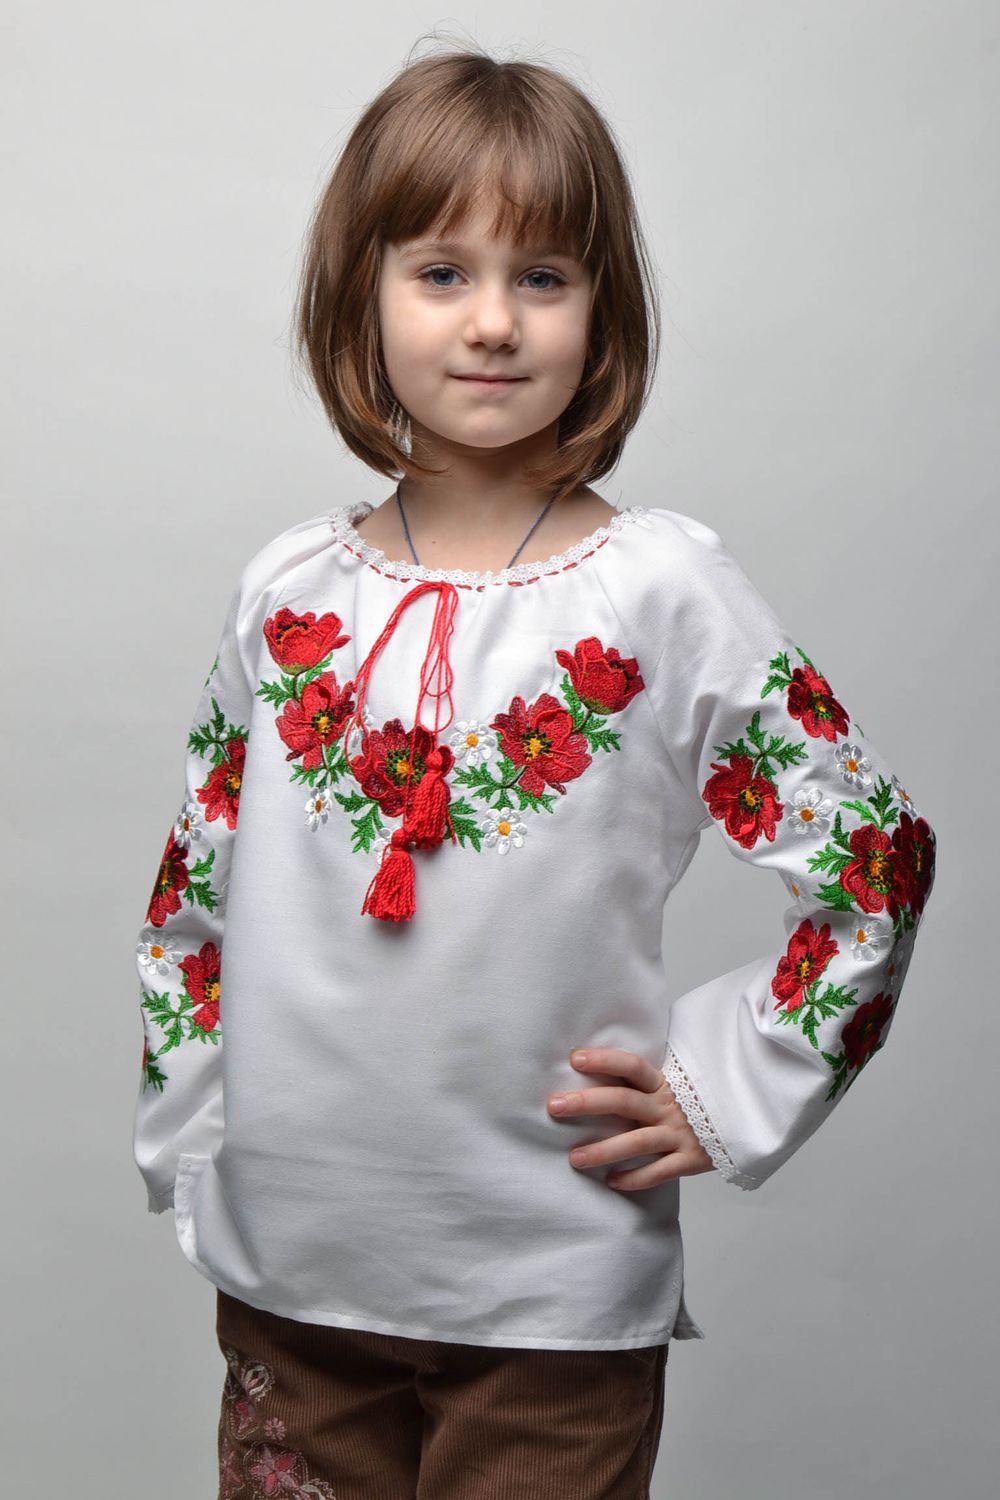 Satin stitch embroidered shirt for 5-7 years old girl photo 1